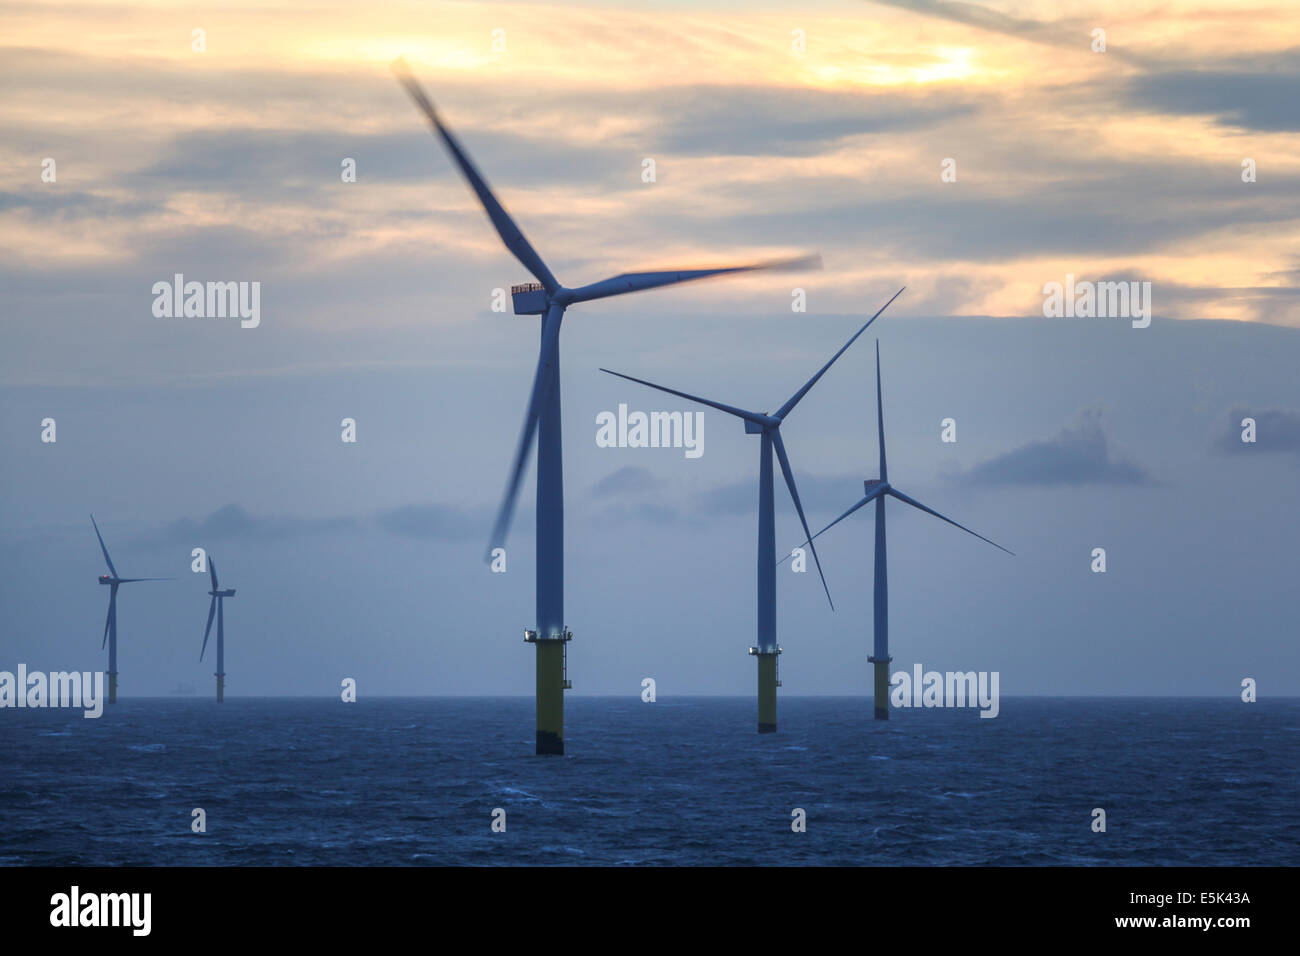 Dawn on the Gwynt y Mor Offshore Wind Farm off the coast of North Wales during the construction phase of spring 2014 Stock Photo